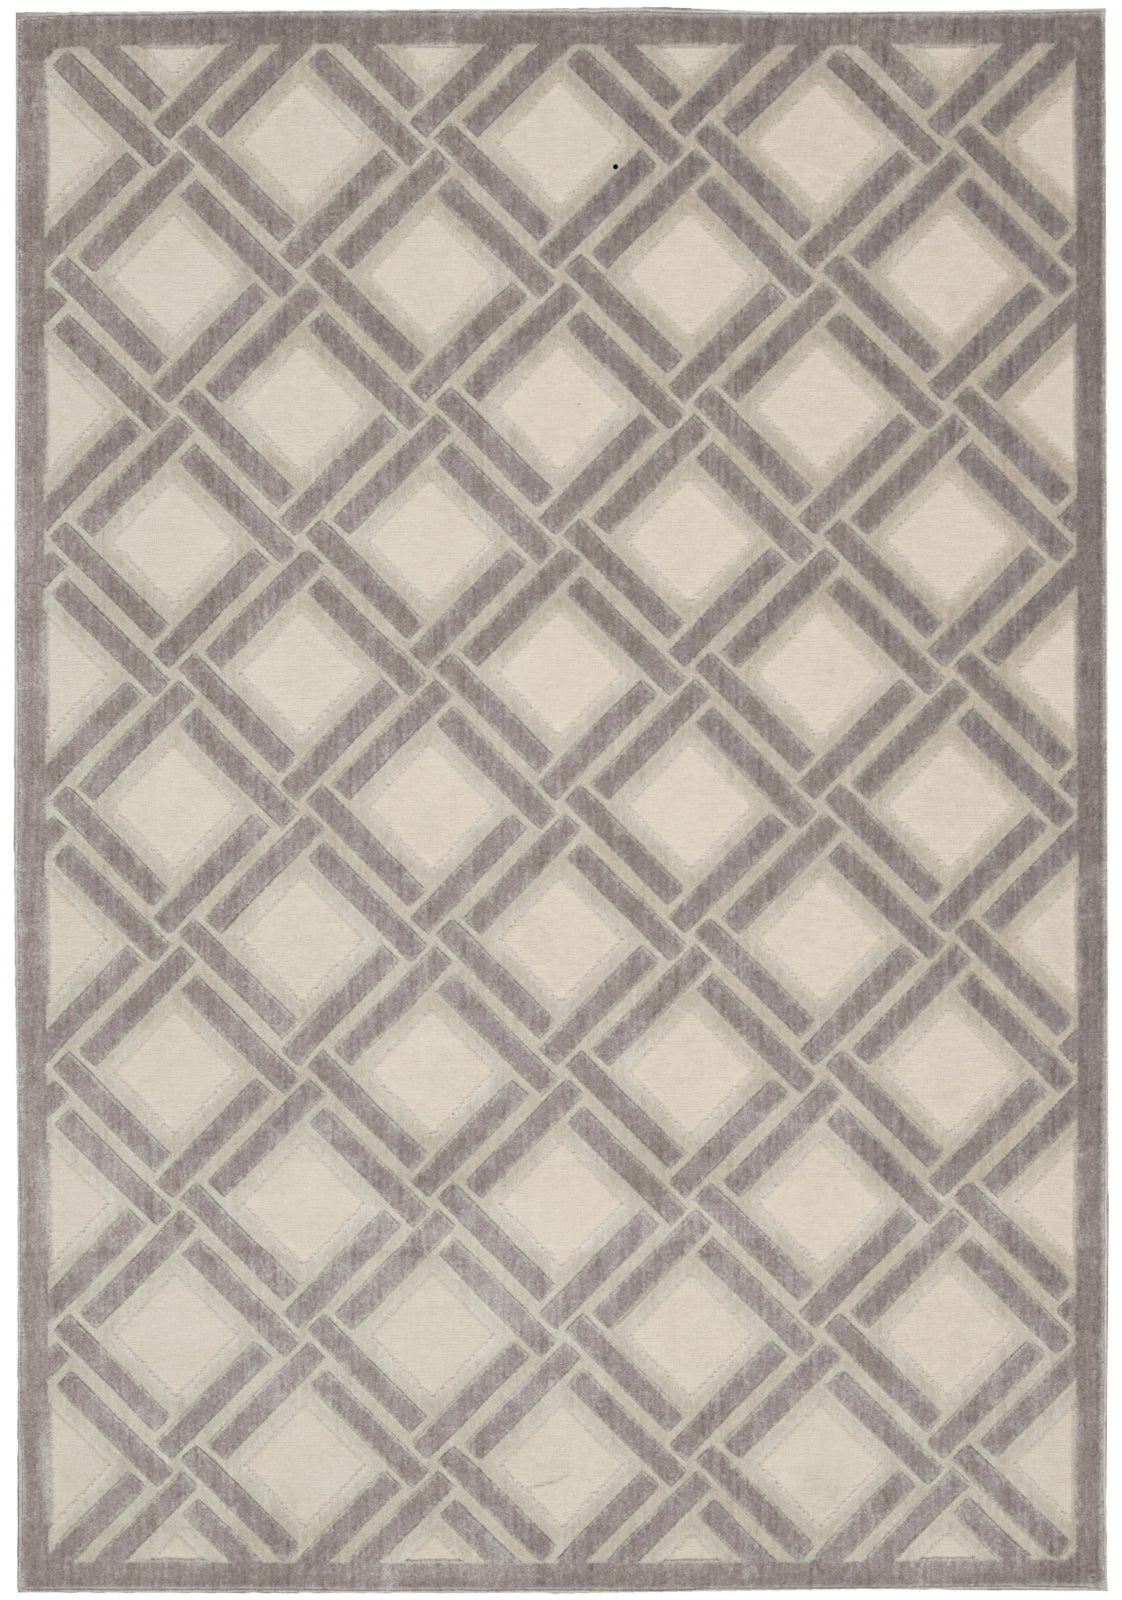 Nourison Graphic Illusions GIL21 Ivory Area Rug main image